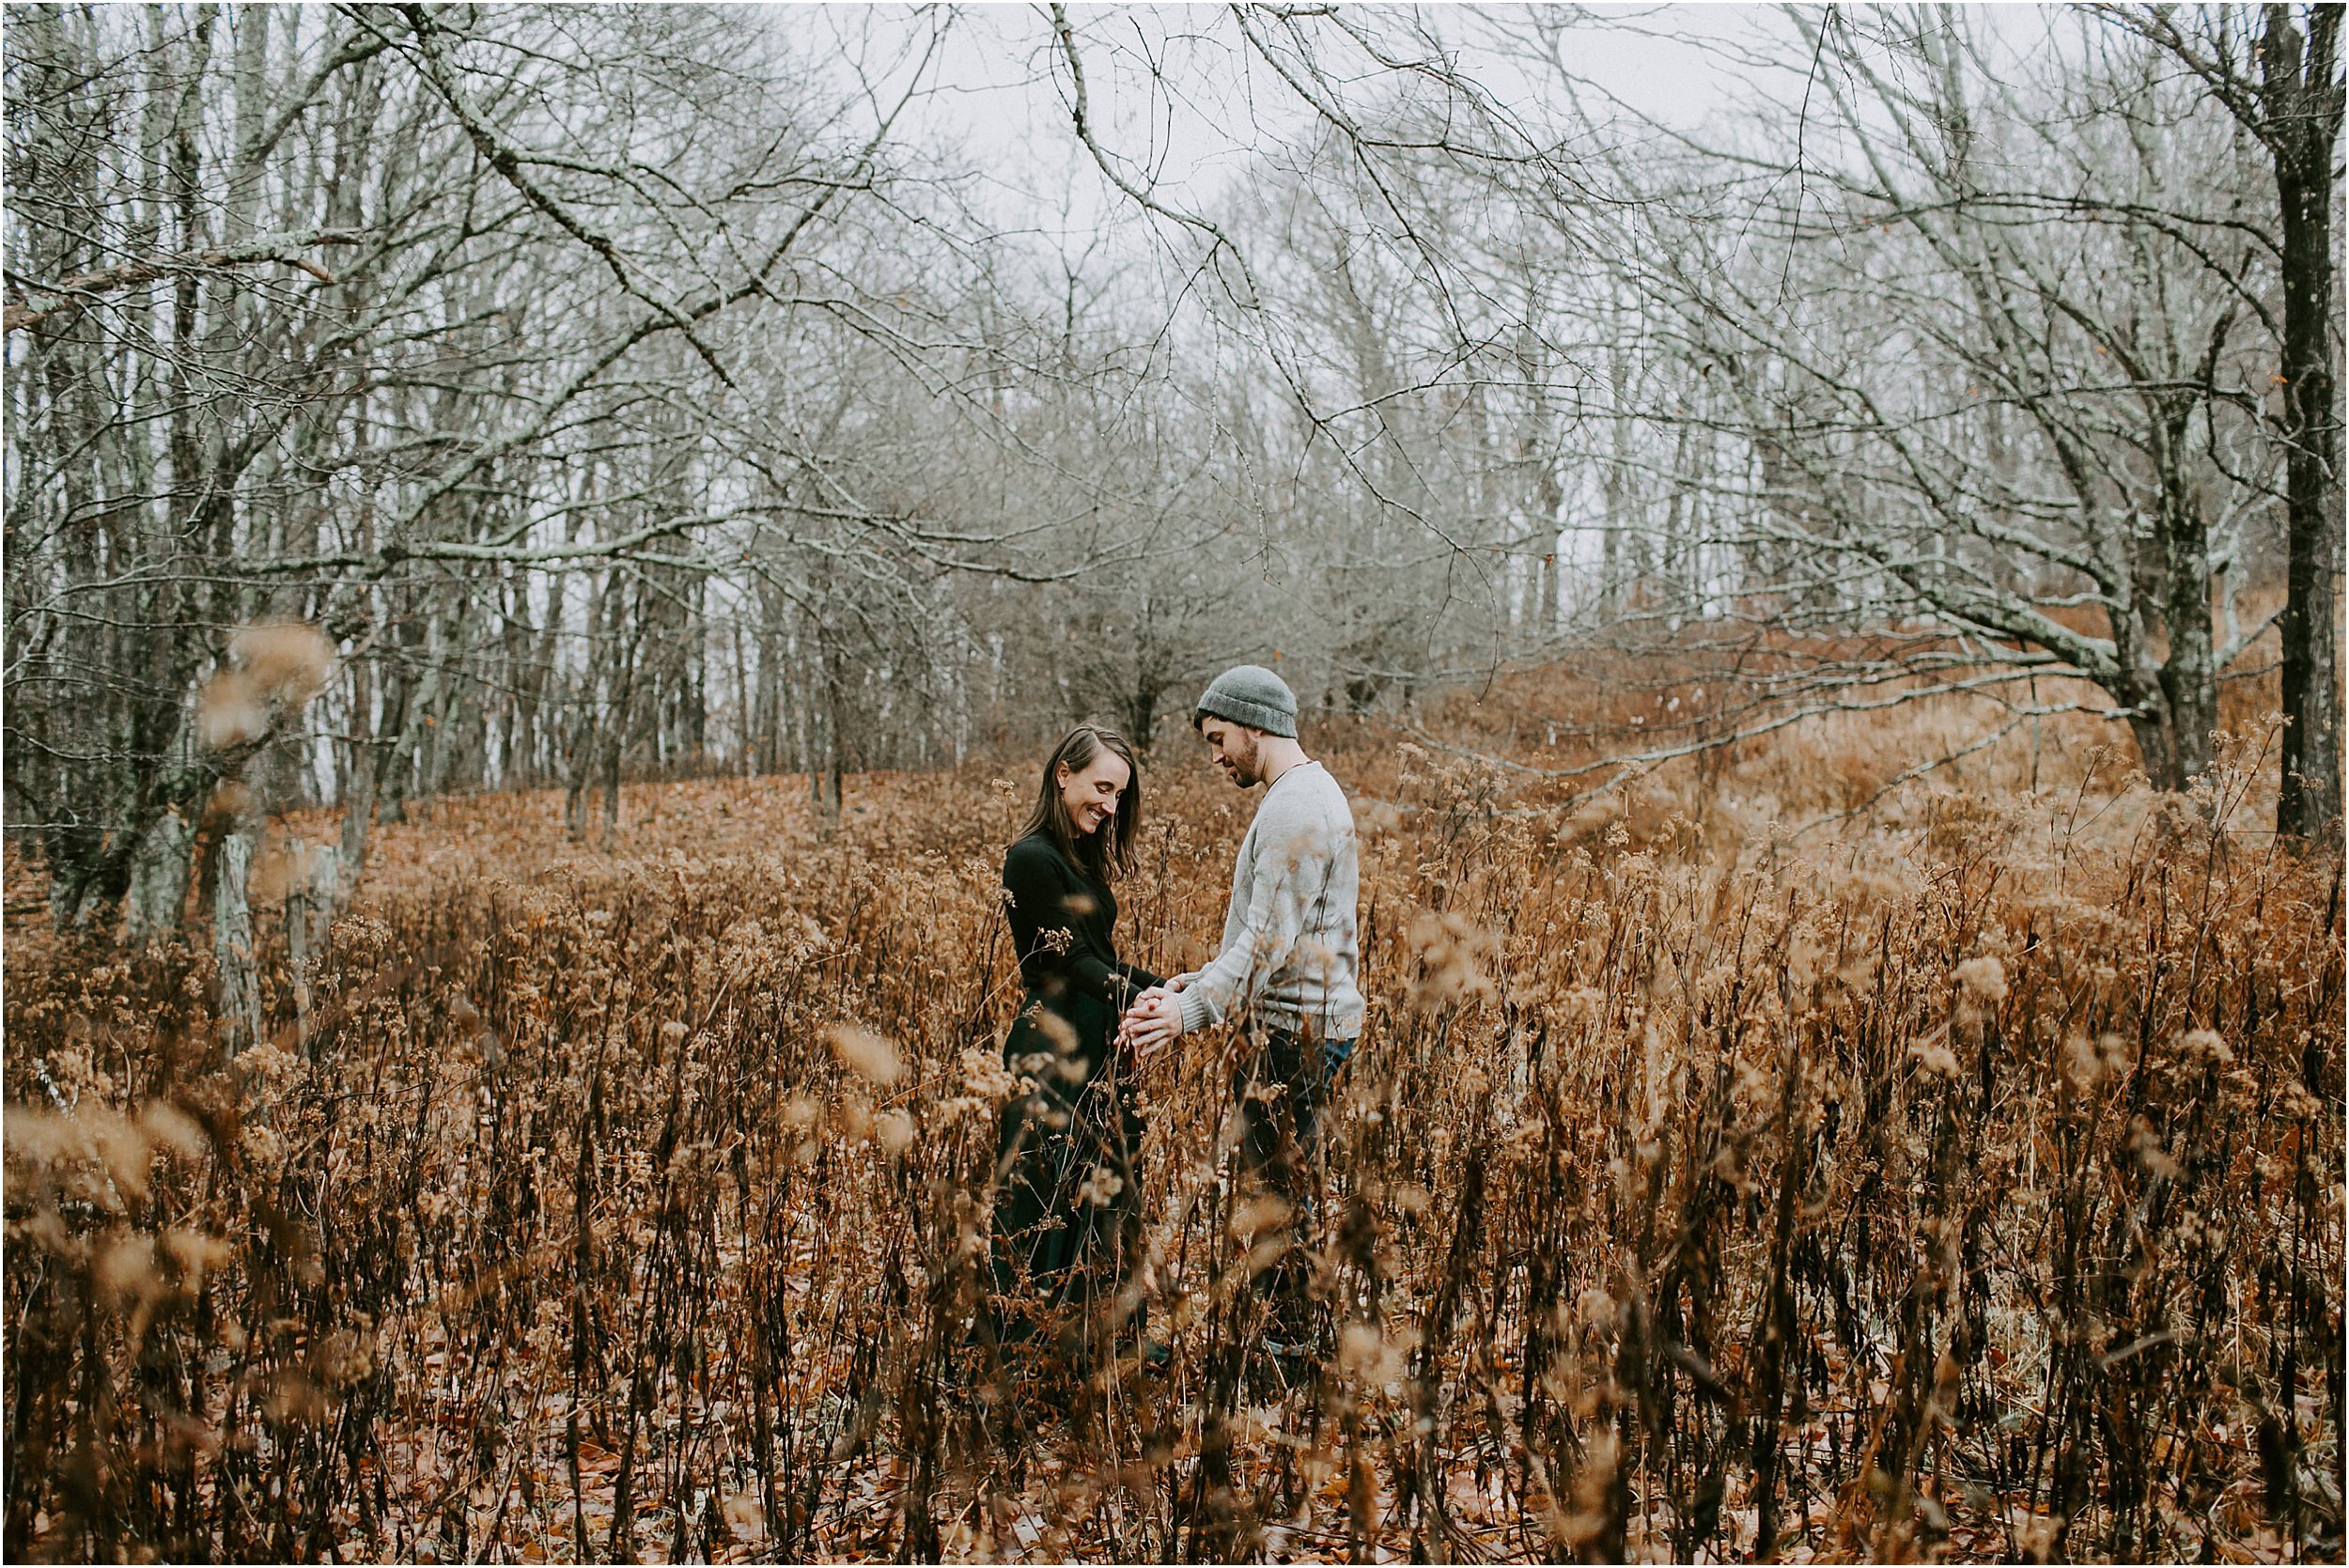  A couple explores the open field during their engagement session.  